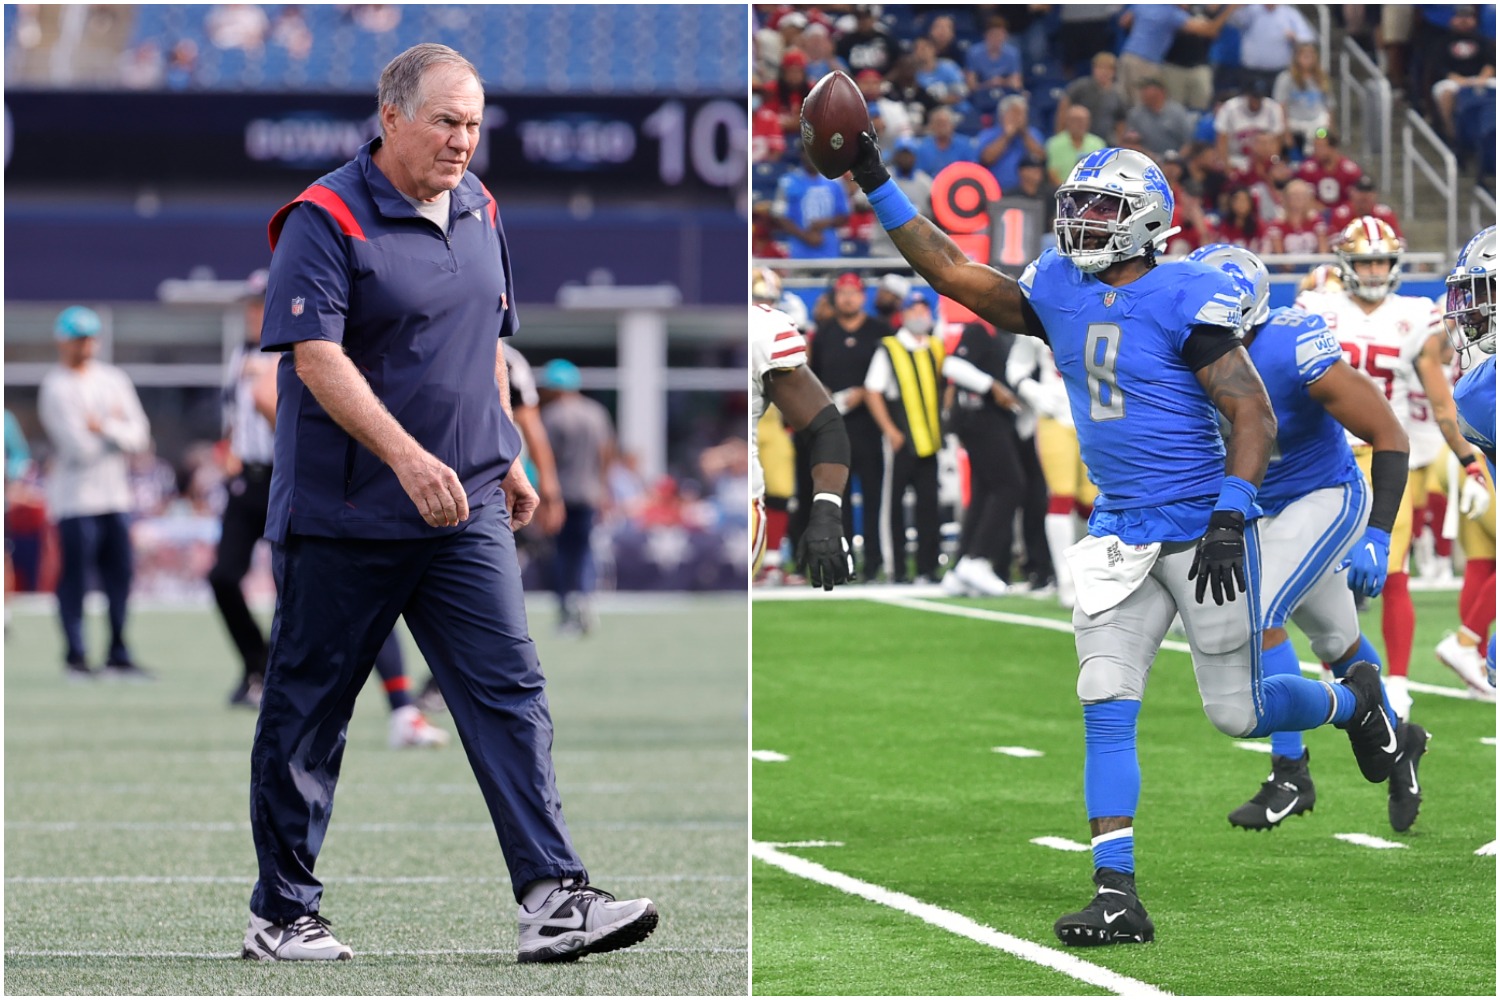 New England Patriots head coach Bill Belichick walks onto the field during warmups while Detroit Lions linebacker Jamie Collins celebrates recording a turnover.